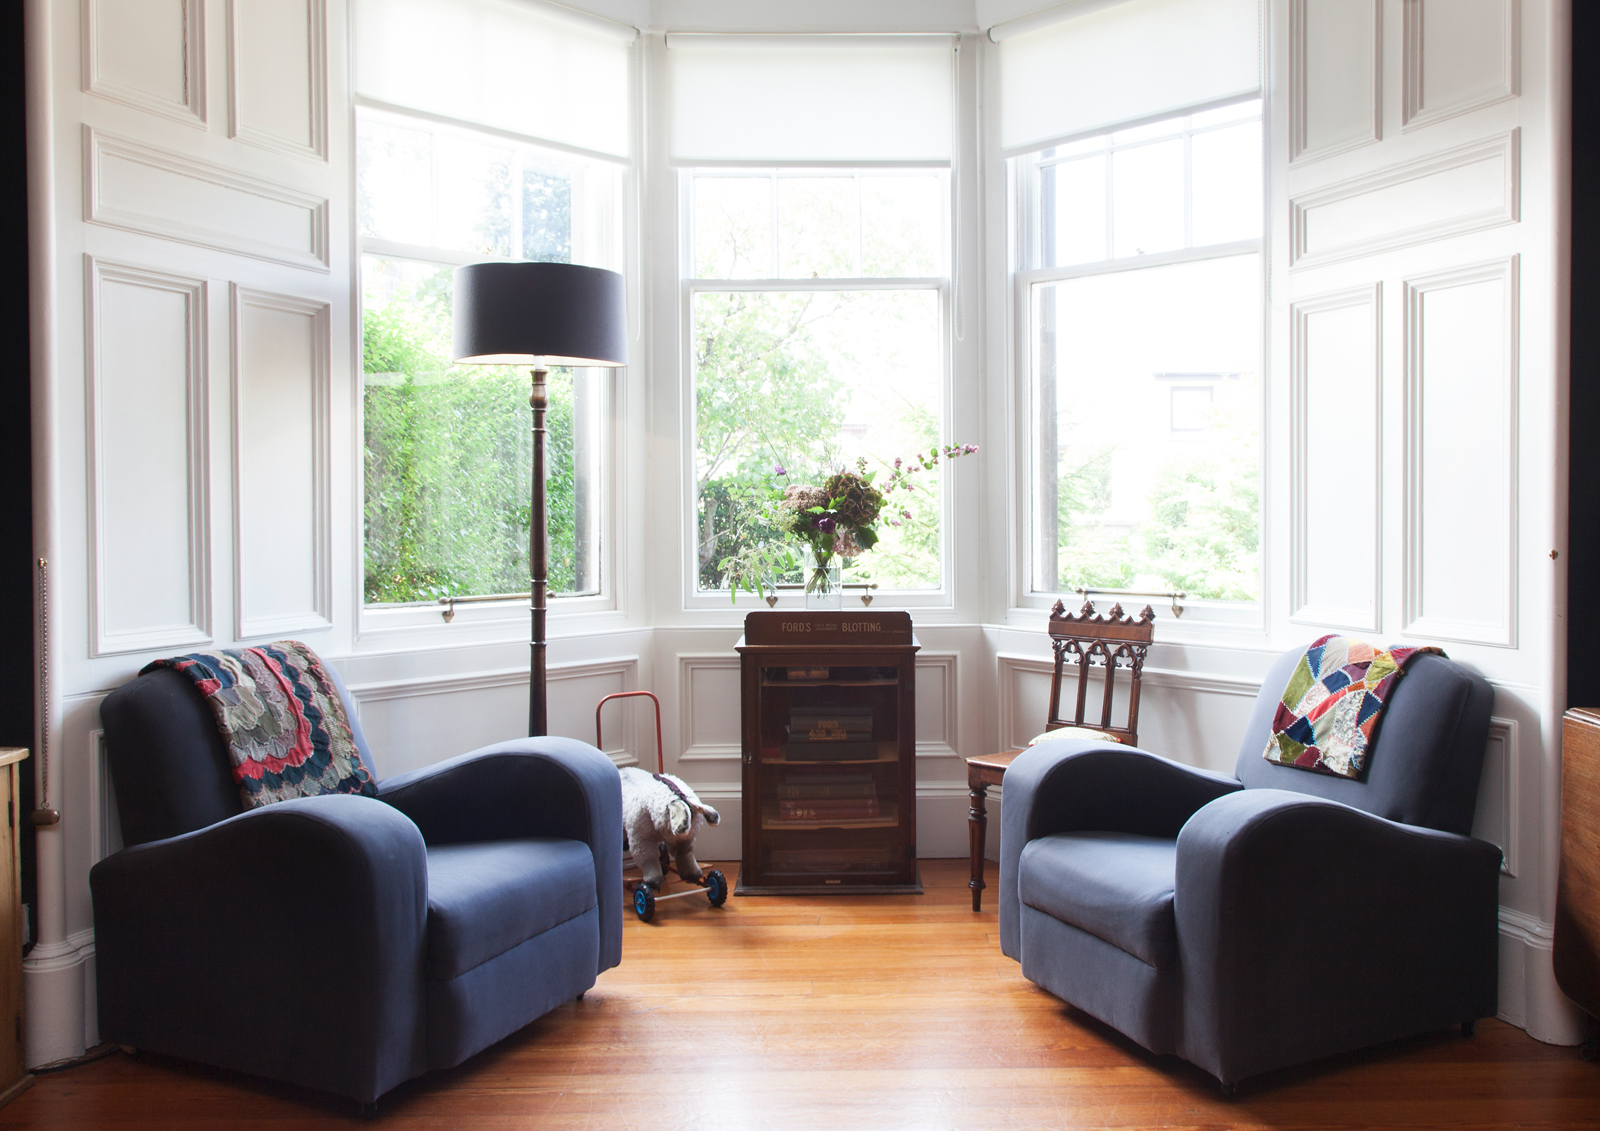 Living room windows in Farrow &amp; Ball Pointing/Photo: Susie Lowe